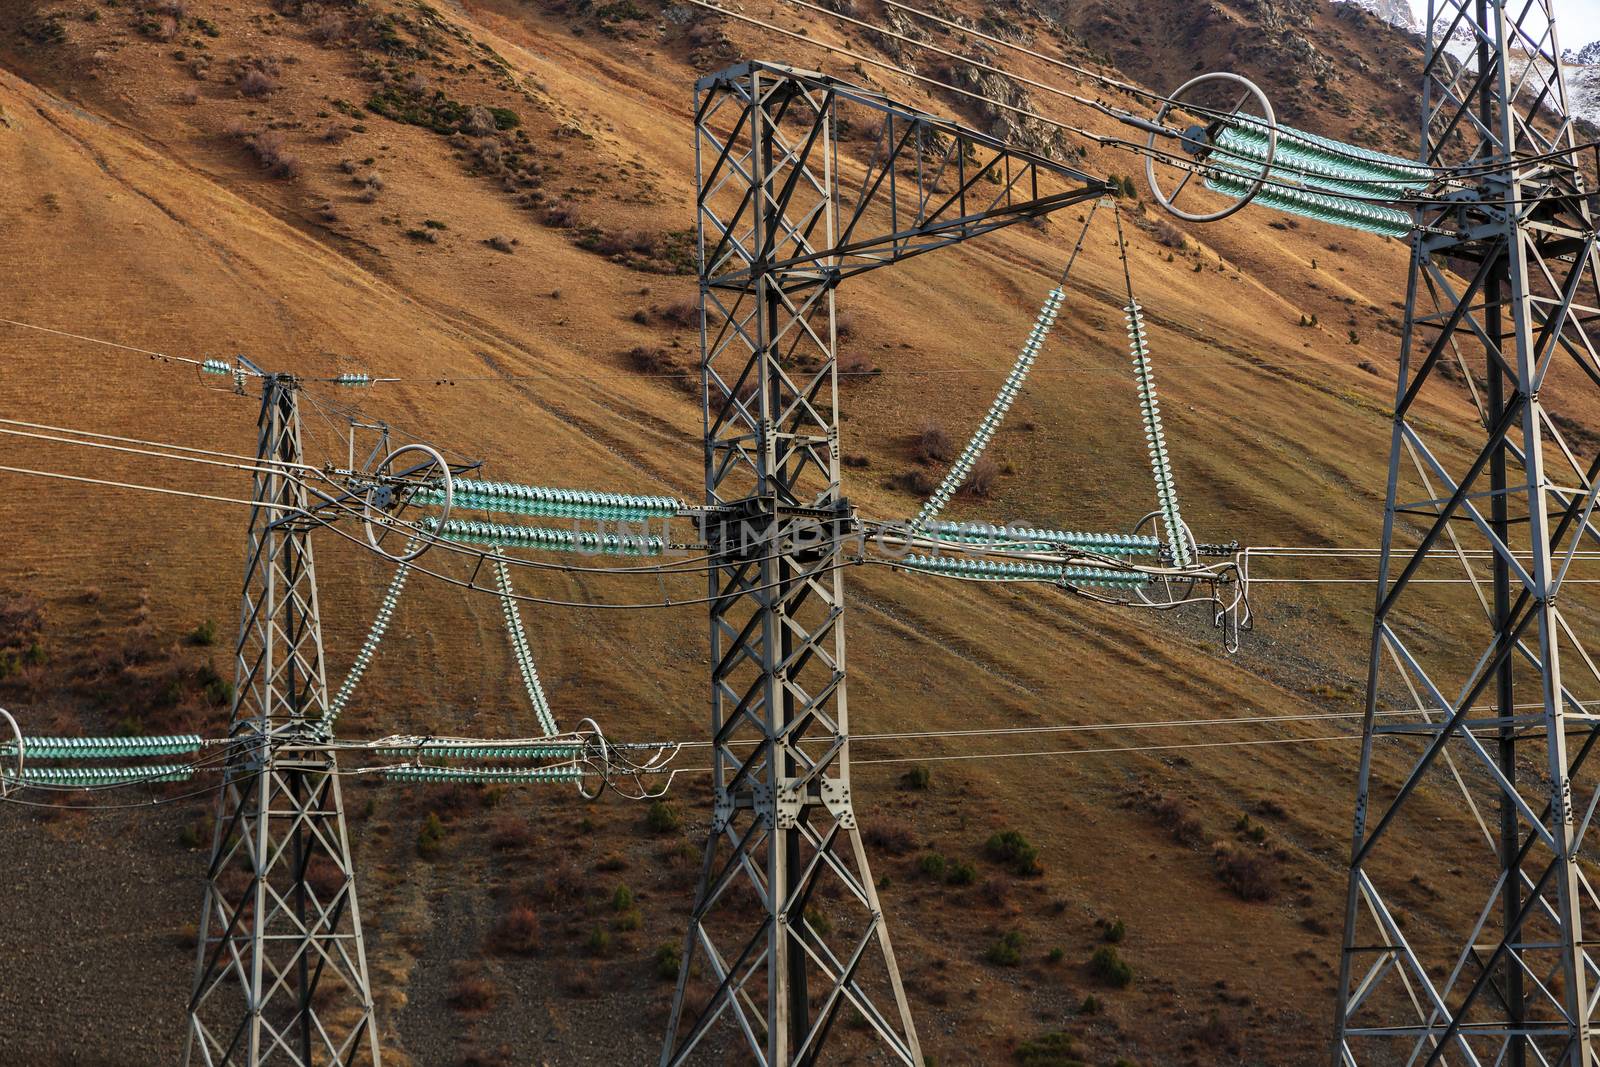 power lines in the mountains of Kyrgyzstan. electricity pylon